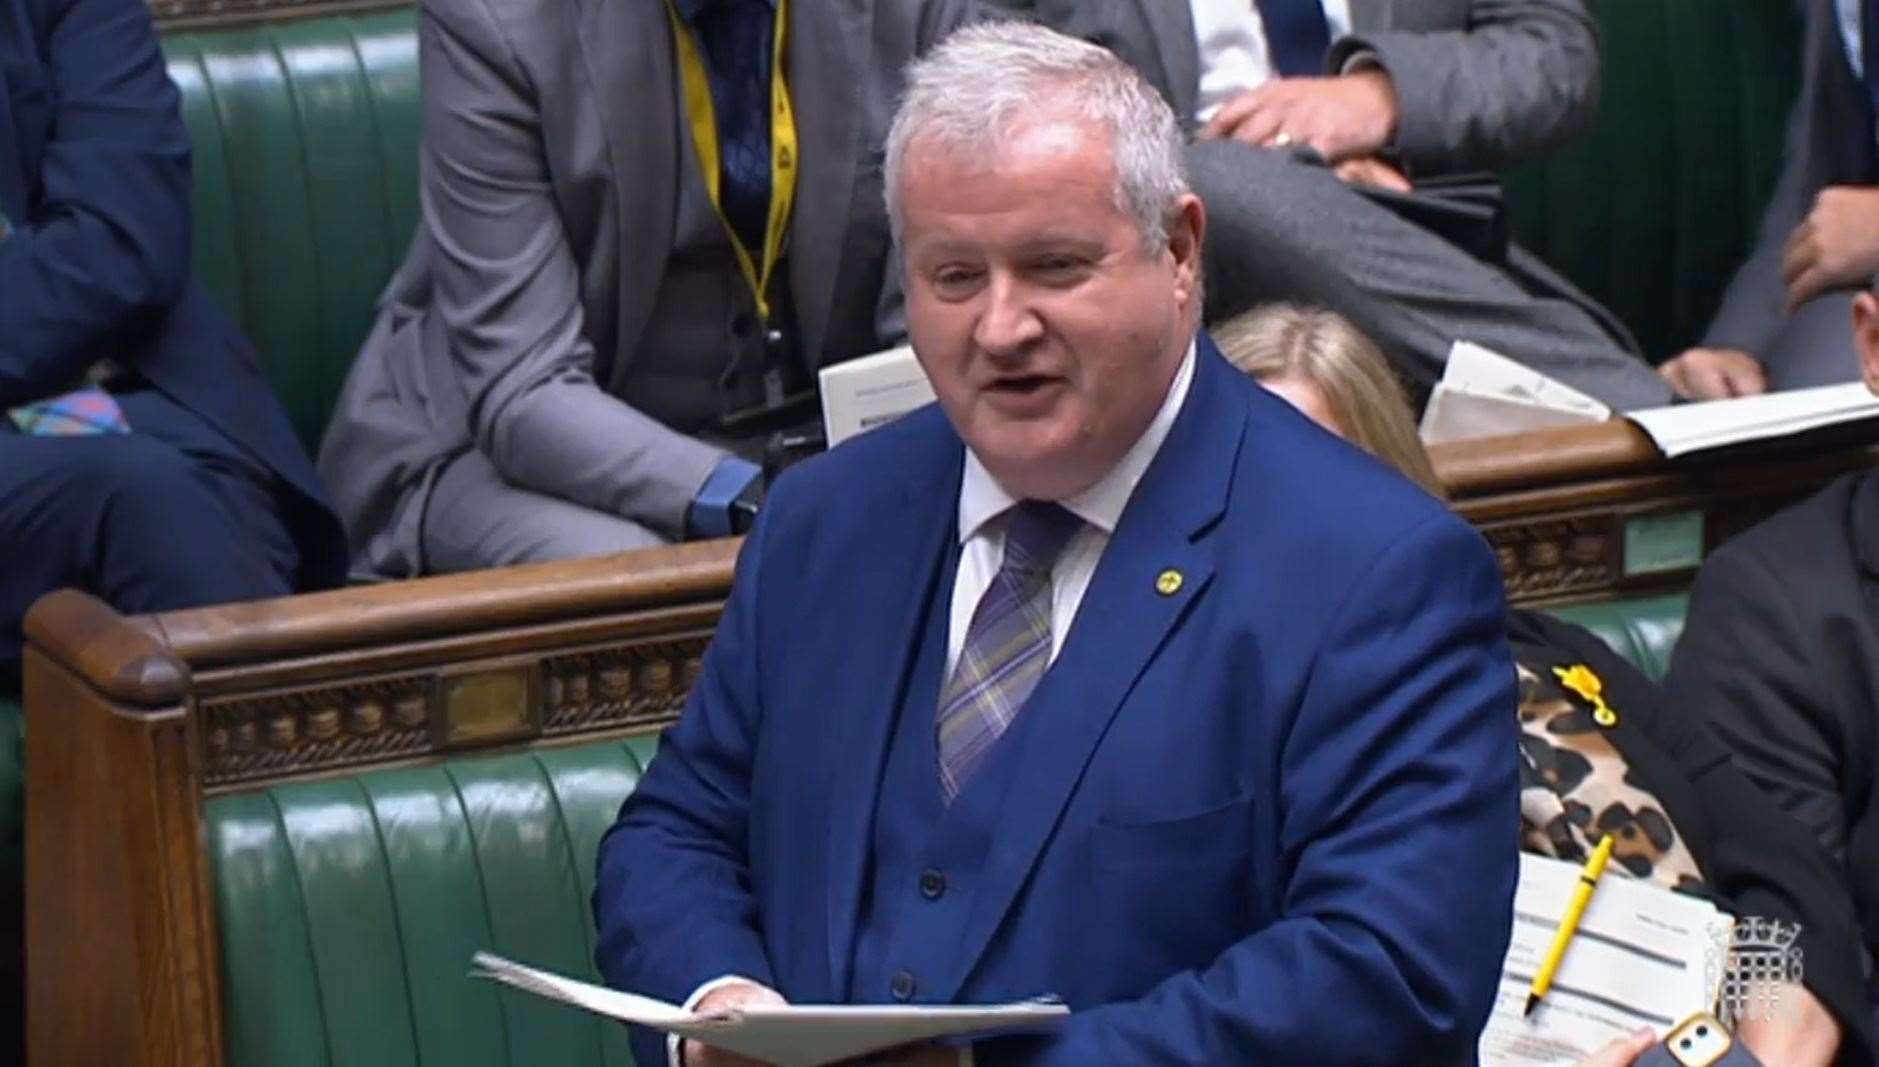 The SNP’s Ian Blackford accused the new PM of imposing a ‘Truss tax on household and businesses’ (House of Commons/PA)